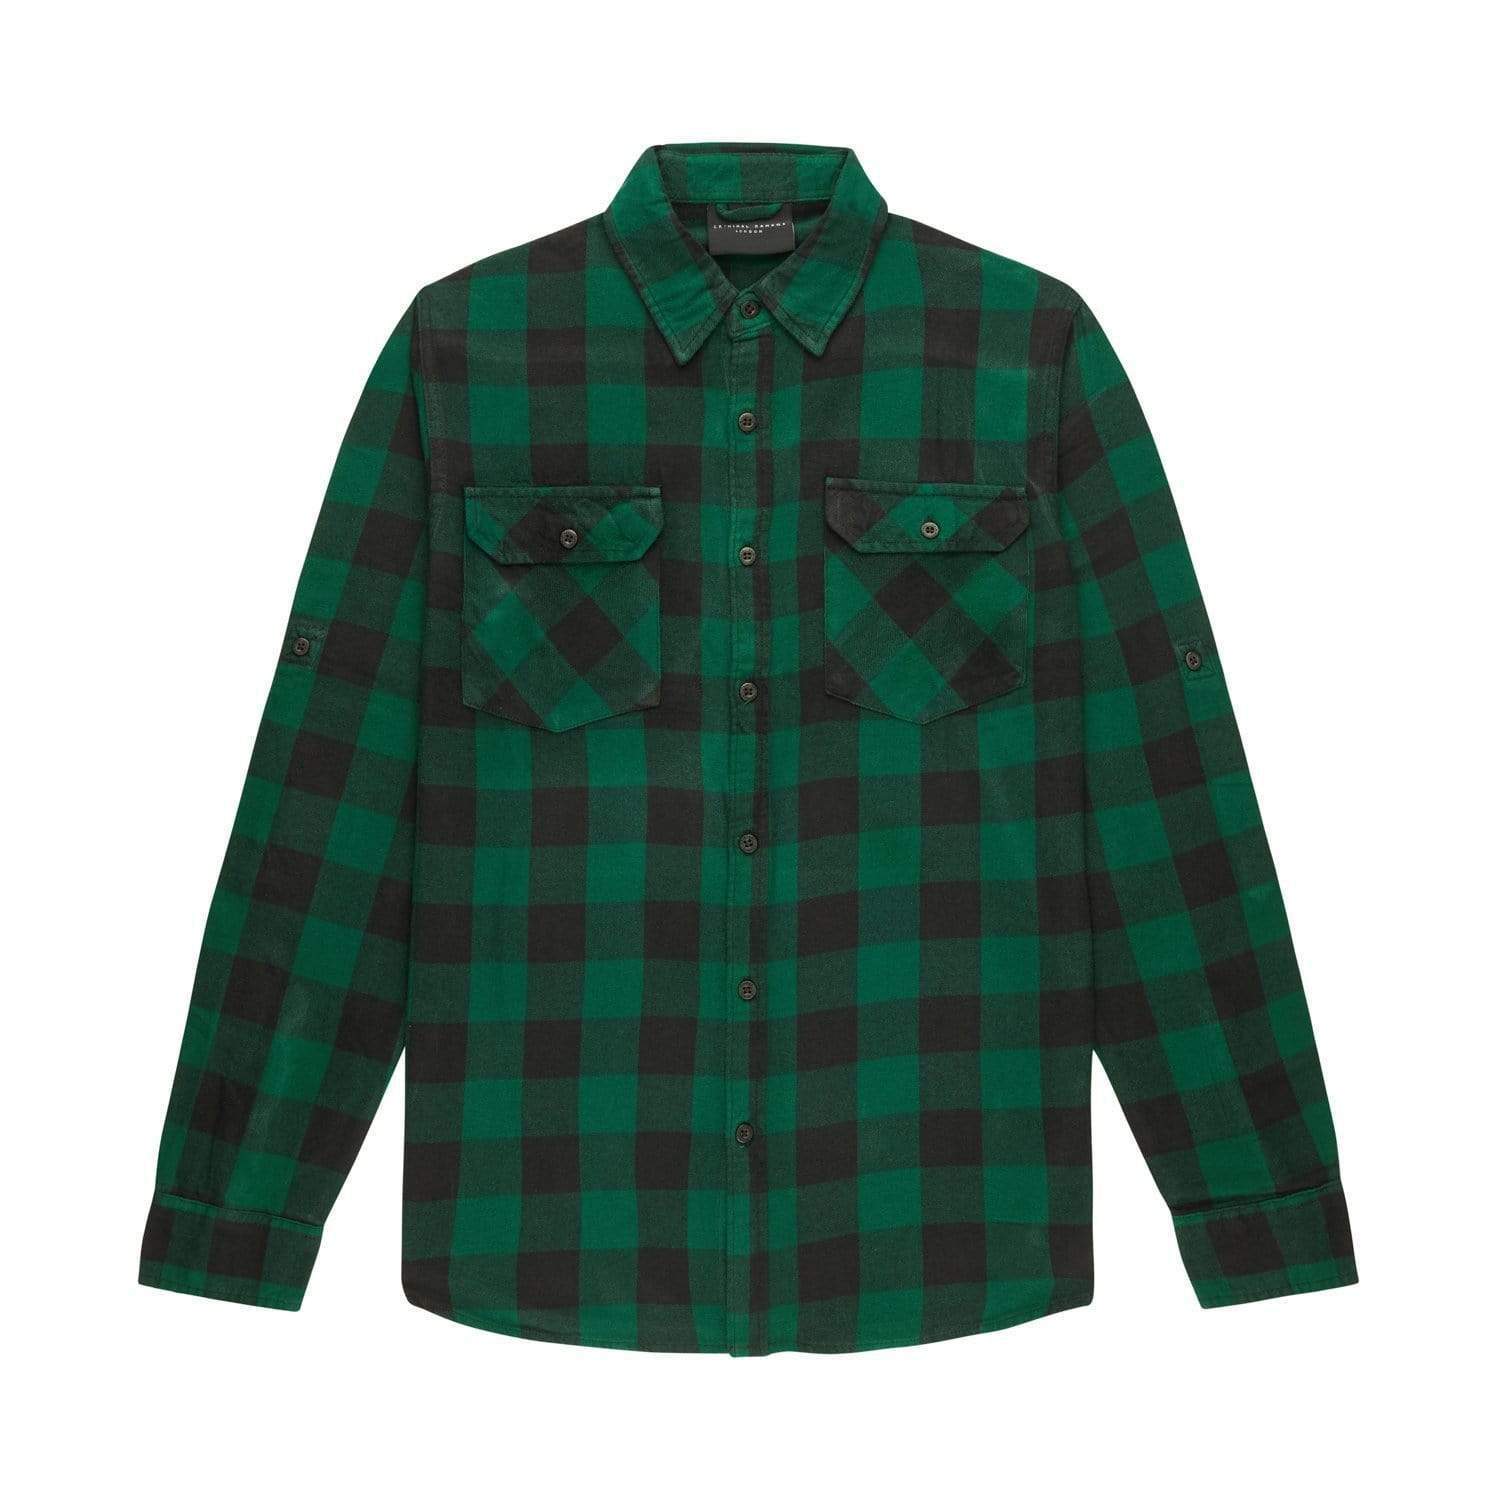 Classic button up check shirt, Chest pocket with logo tab